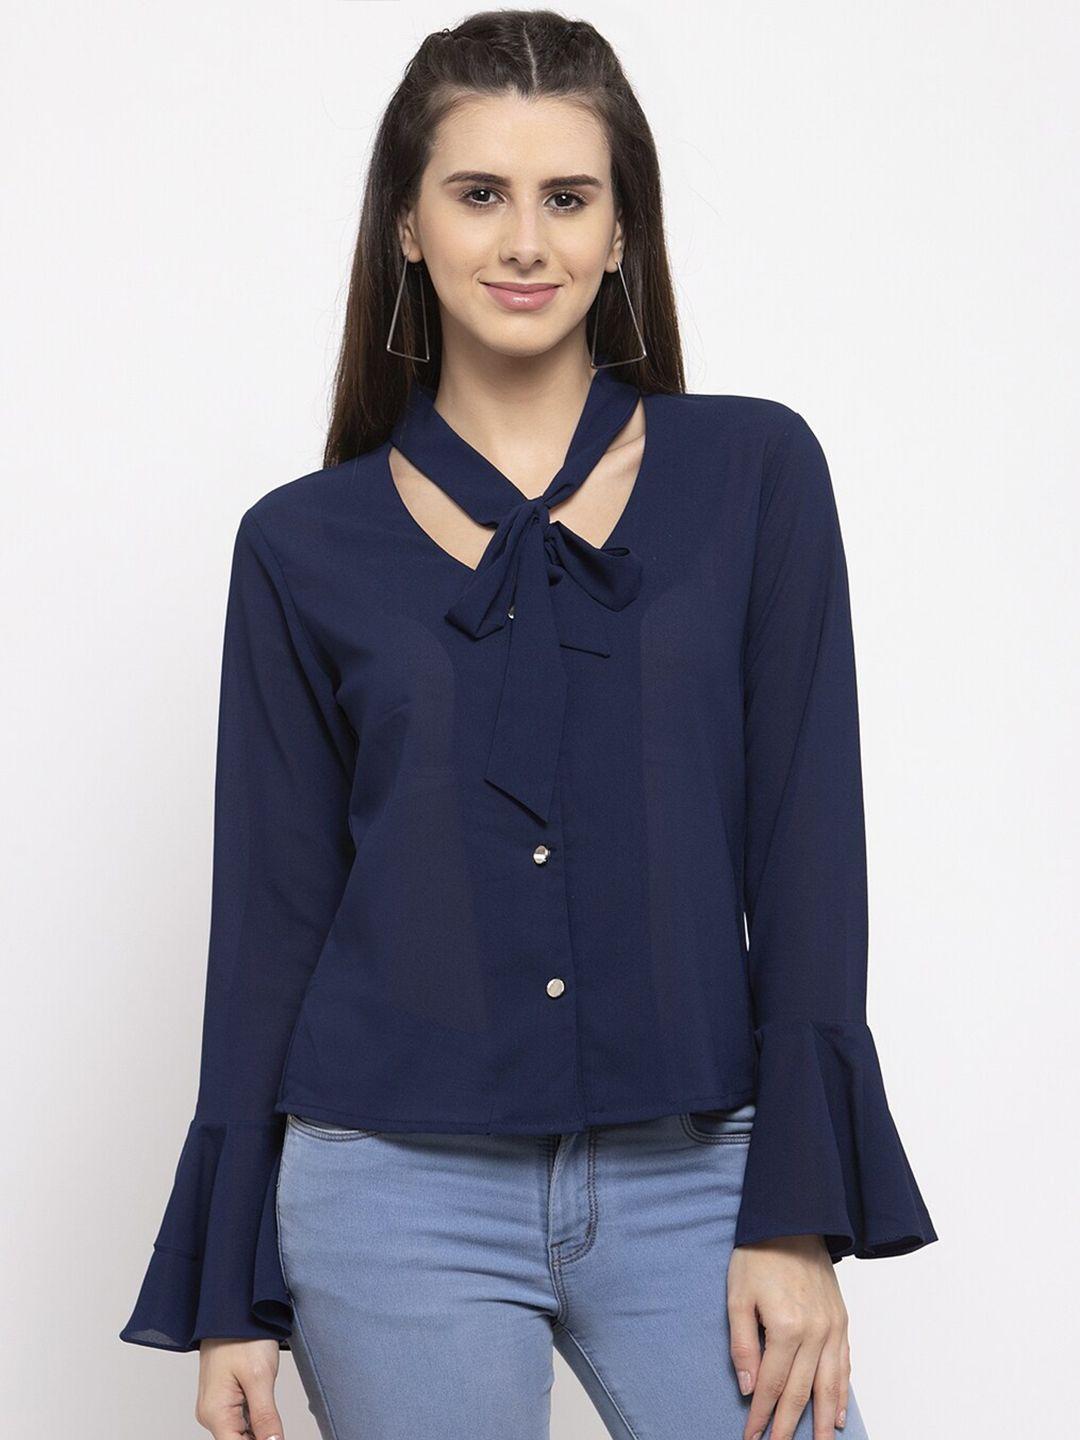 claura navy blue solid tie-up neck georgette shirt style top